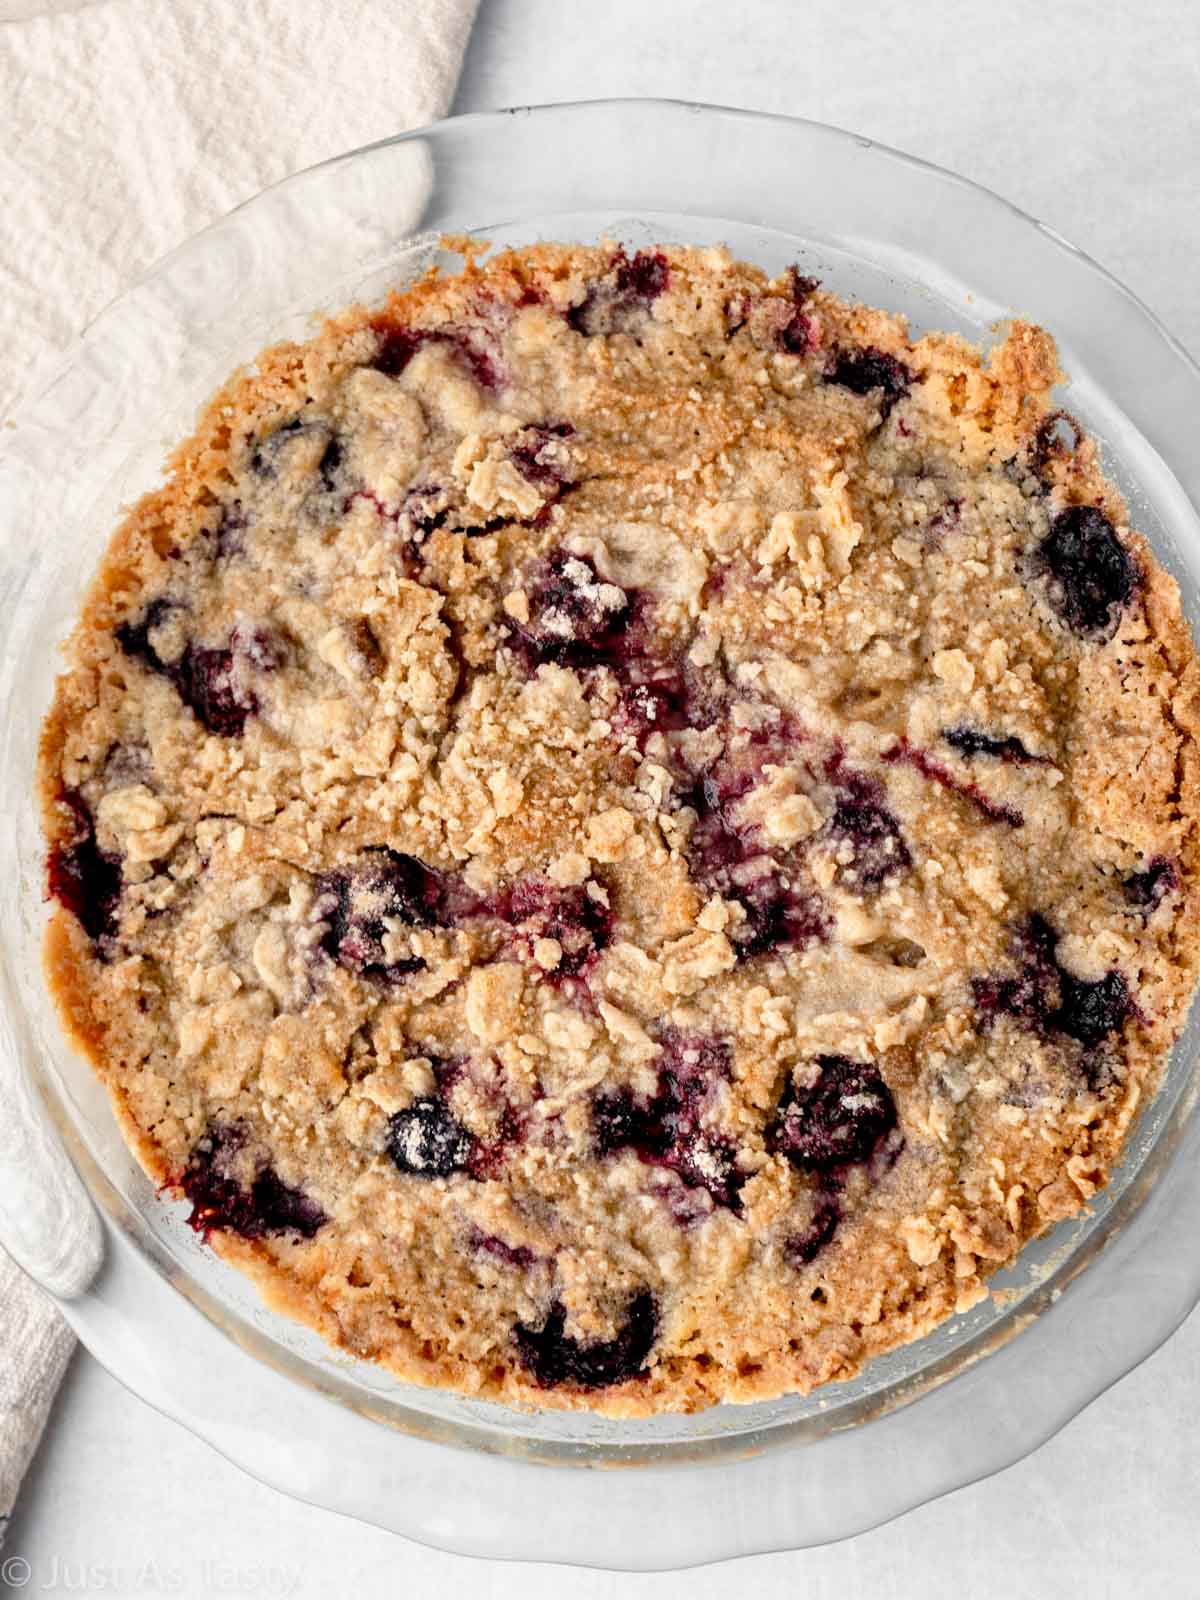 Blackberry pie with crumble topping in a glass pie plate.